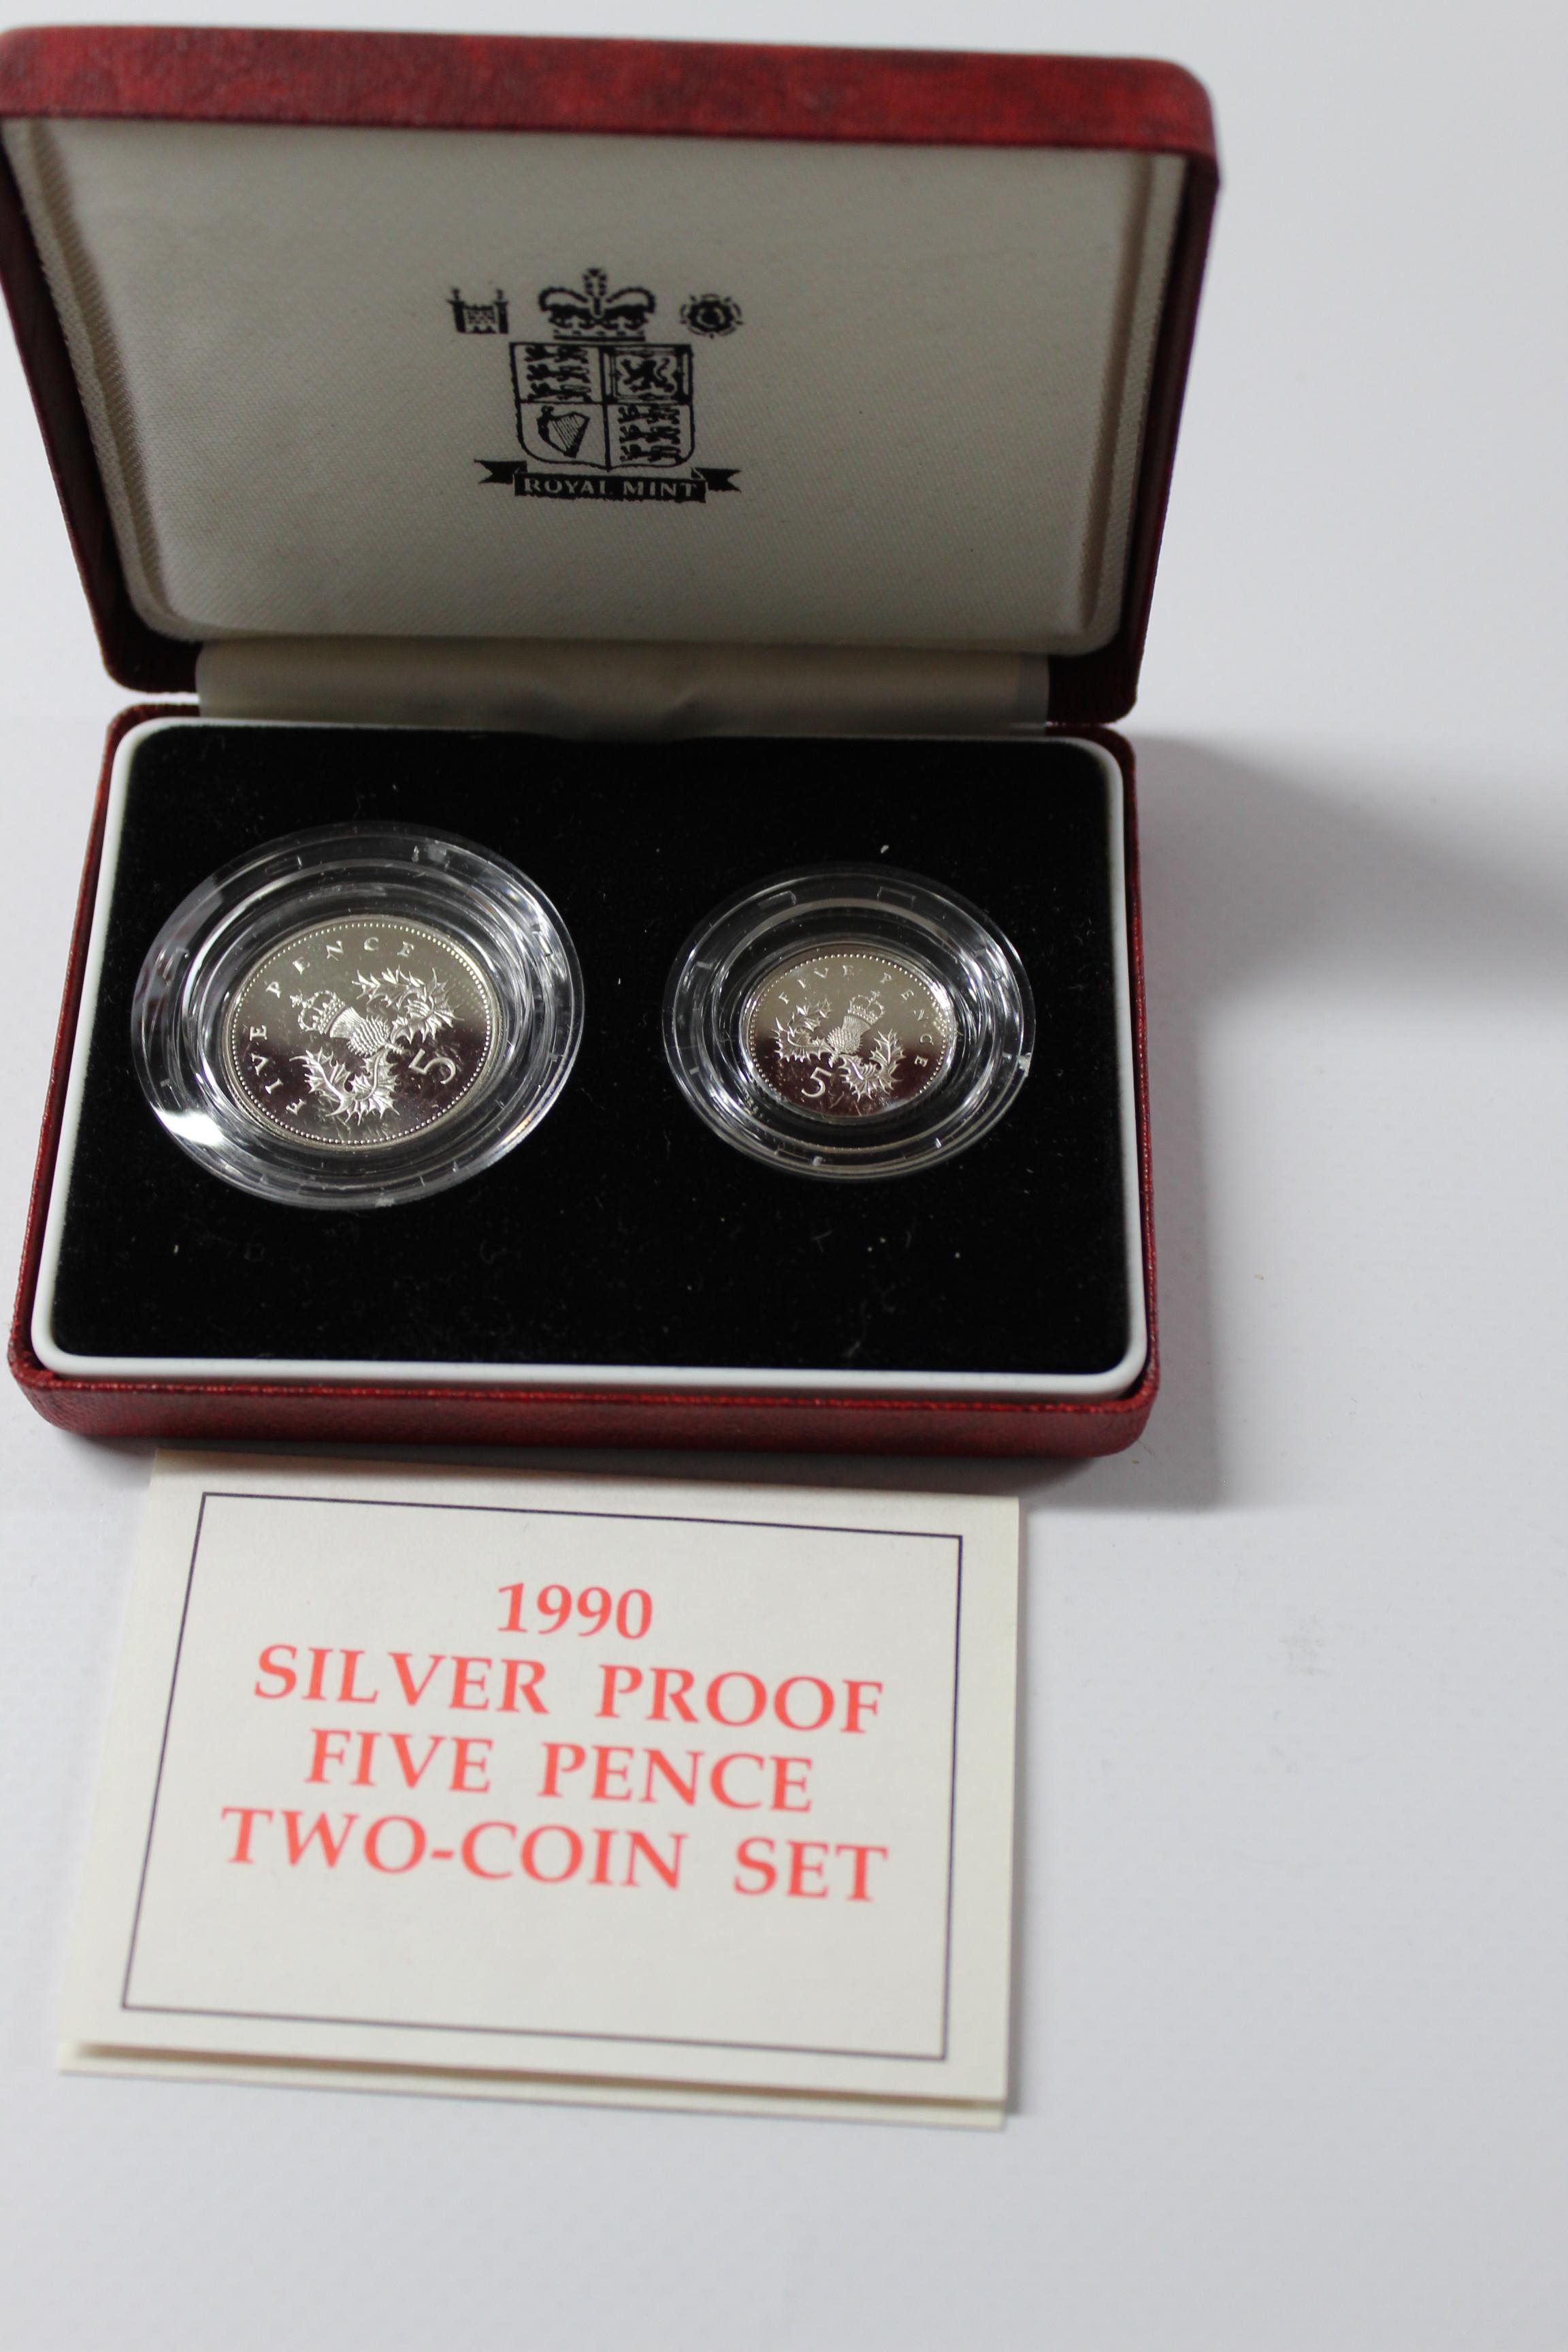 1990 Silver Proof Five Pence 2 coin set